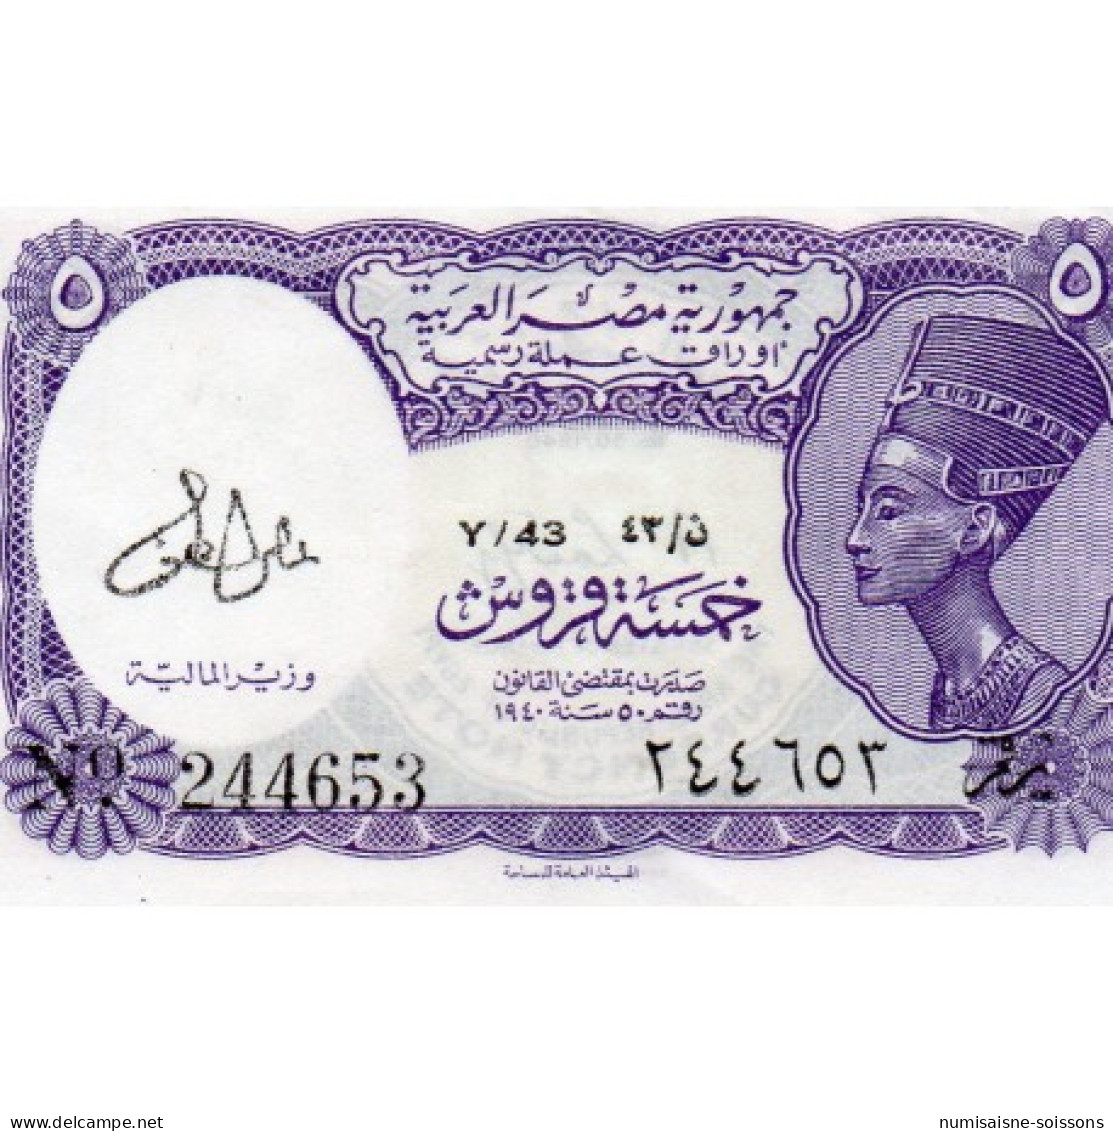 EGYPTE - PICK 182 G - 5 PIASTRES - L.1940 (ND1971) - Sign A.LOUTFY - SERIE 43 - SUP - Aegypten